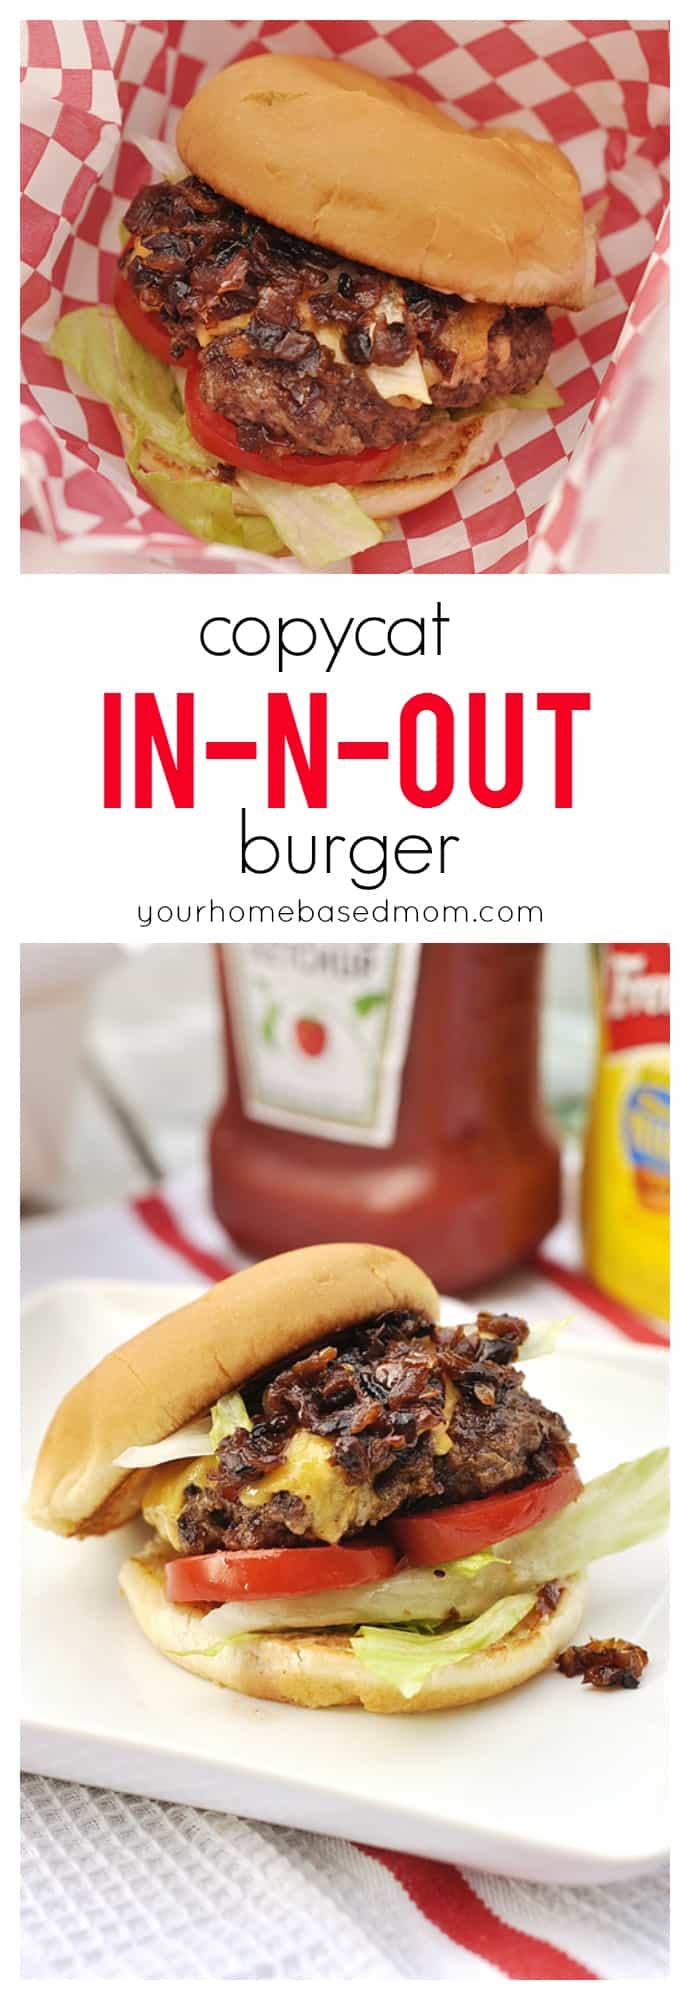 In N Out Burger Recipe | Your Homebased Mom | Copycat In-N-Out Burger